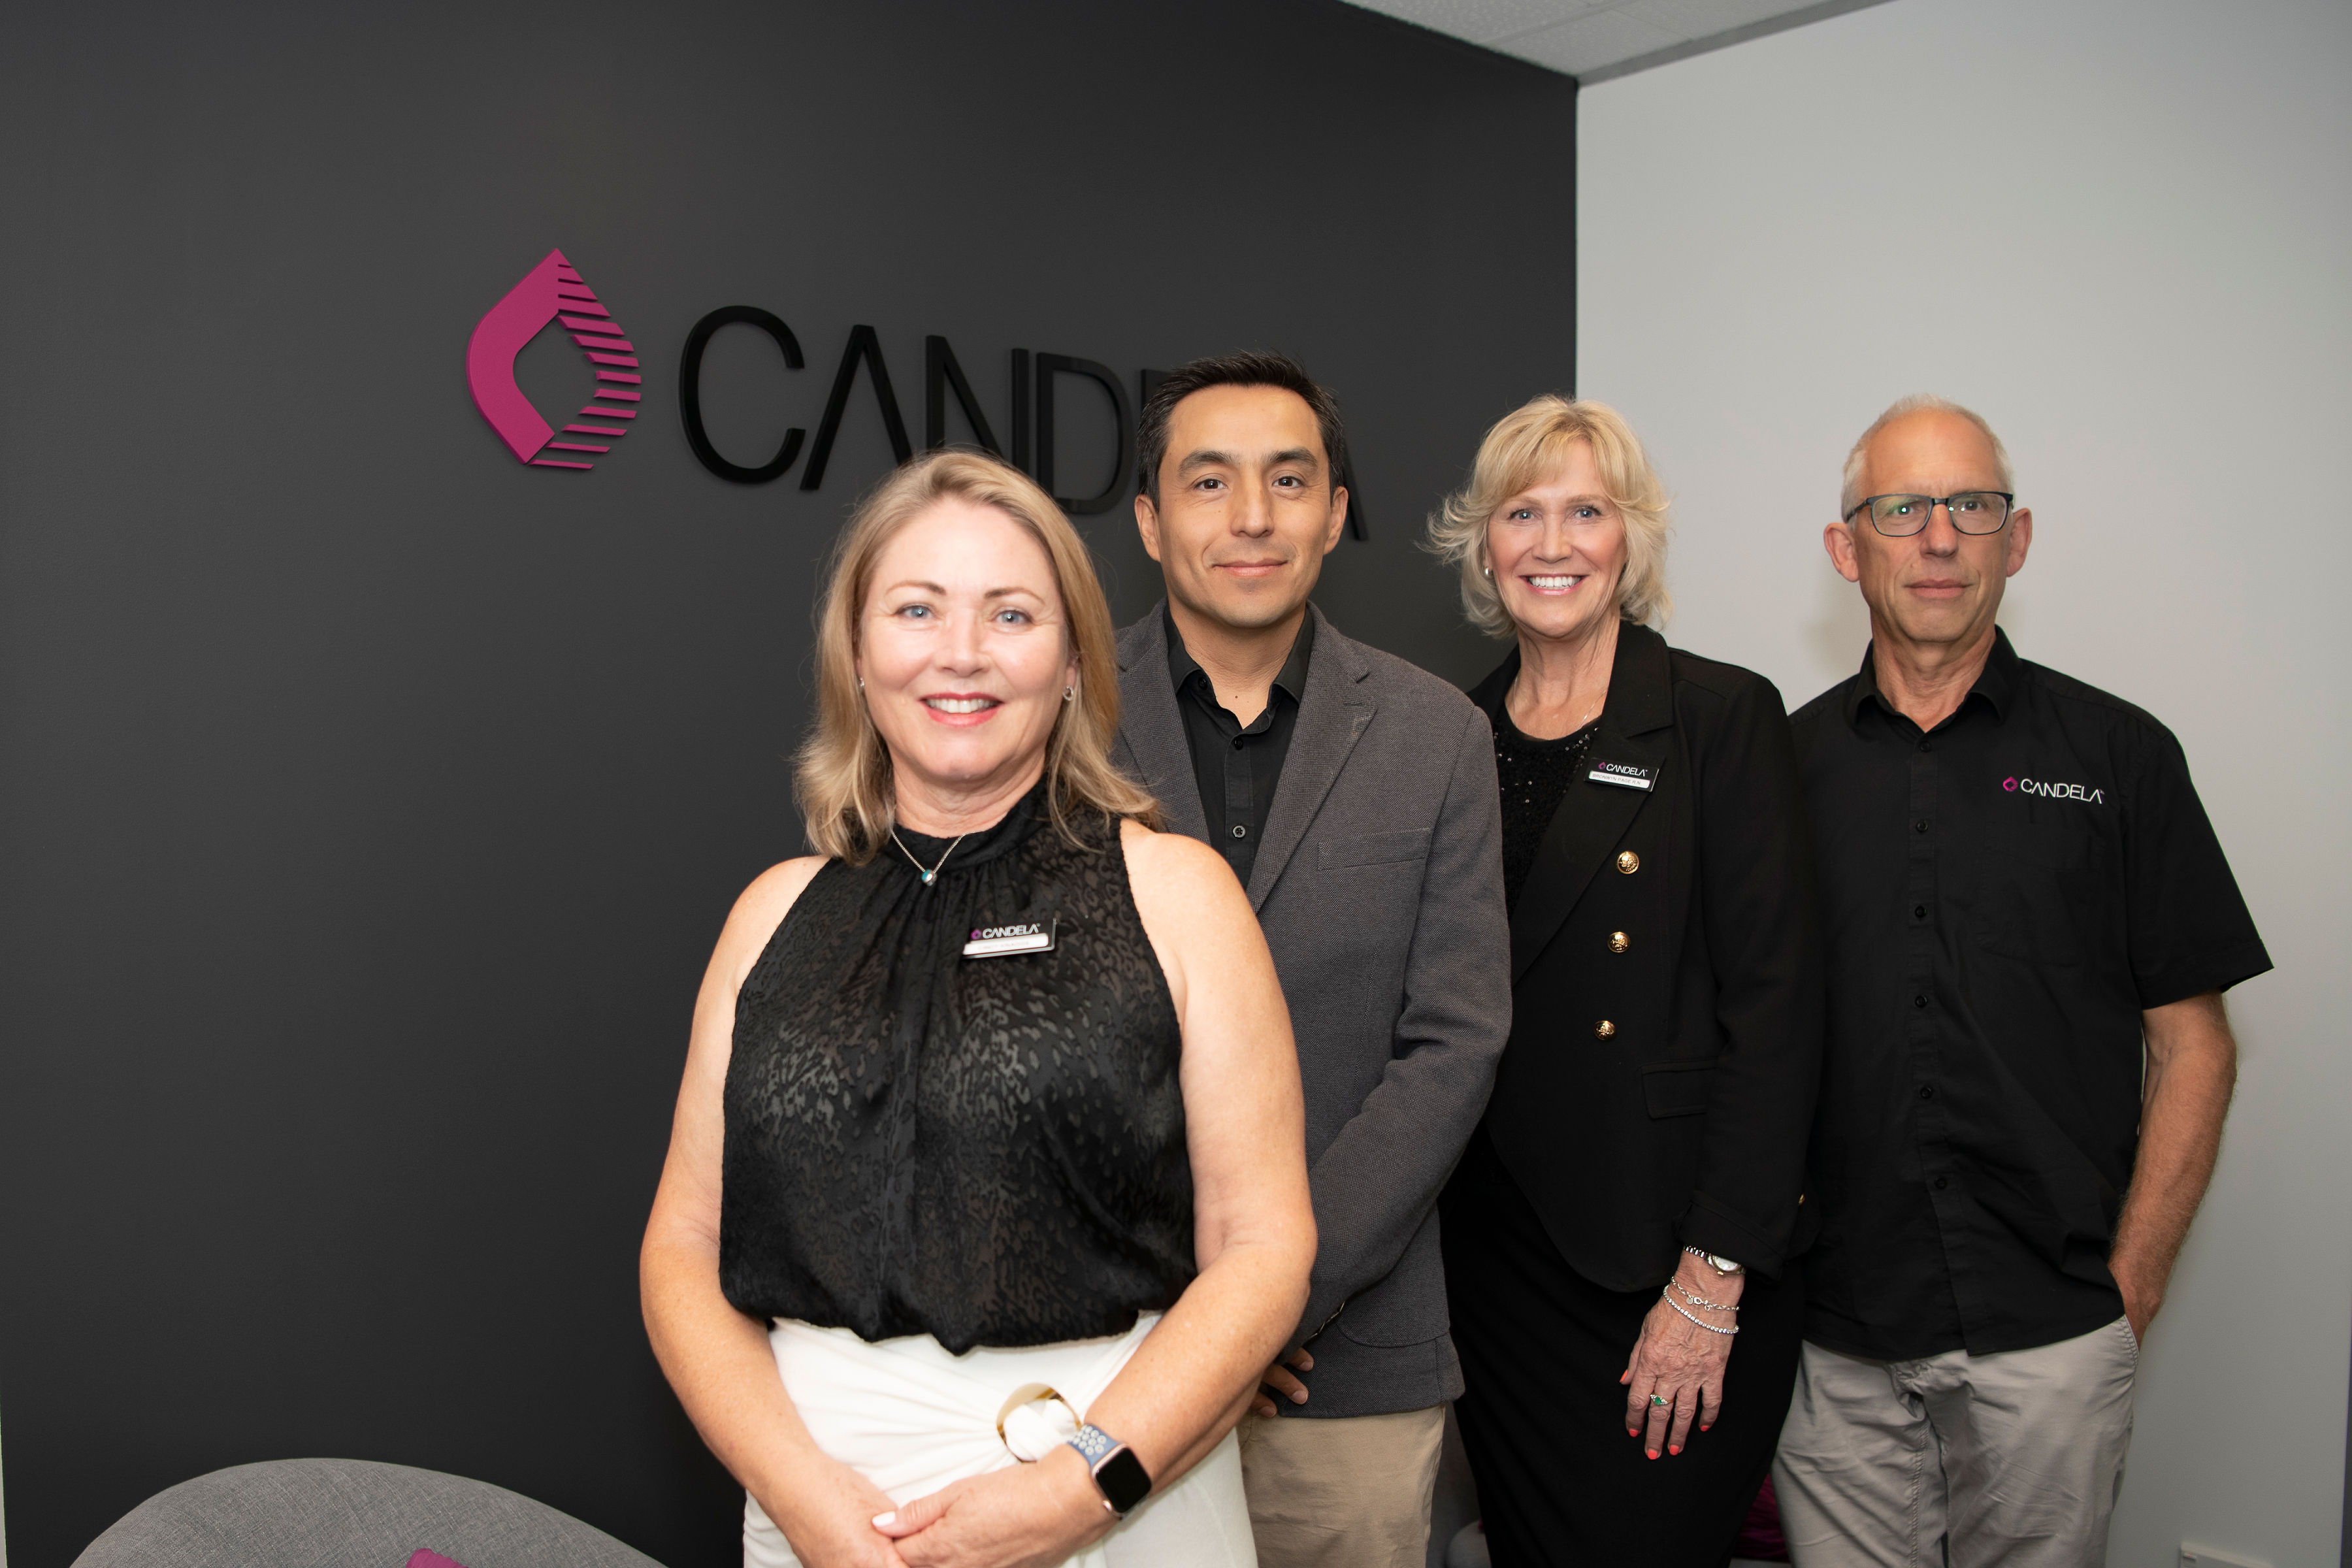 Candela opens first New Zealand training and education centre